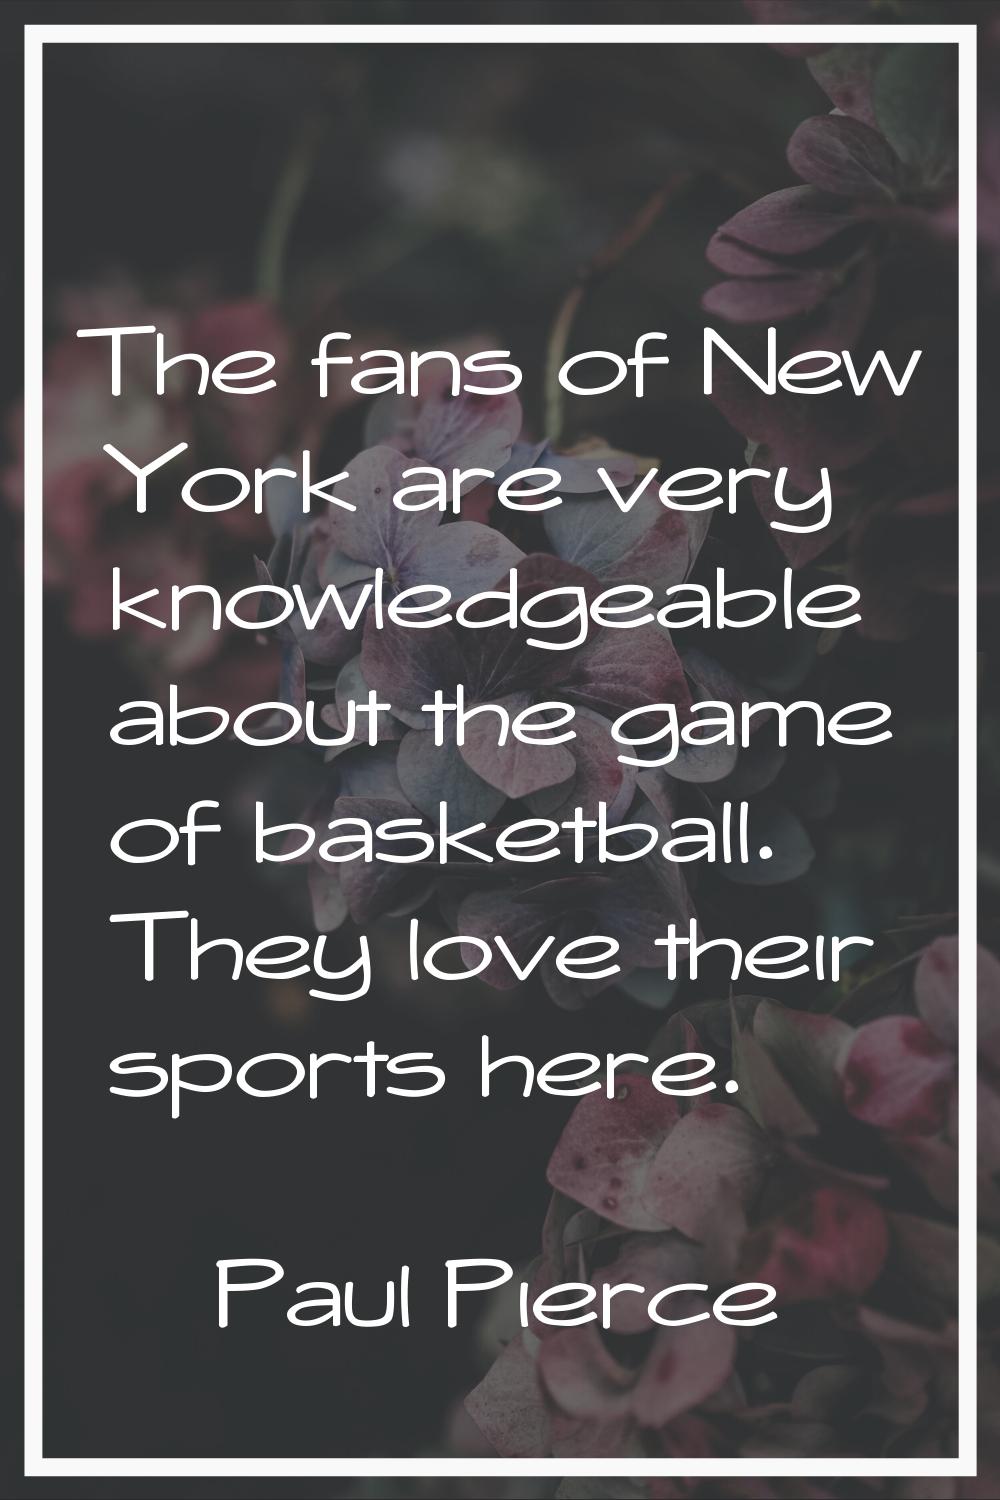 The fans of New York are very knowledgeable about the game of basketball. They love their sports he